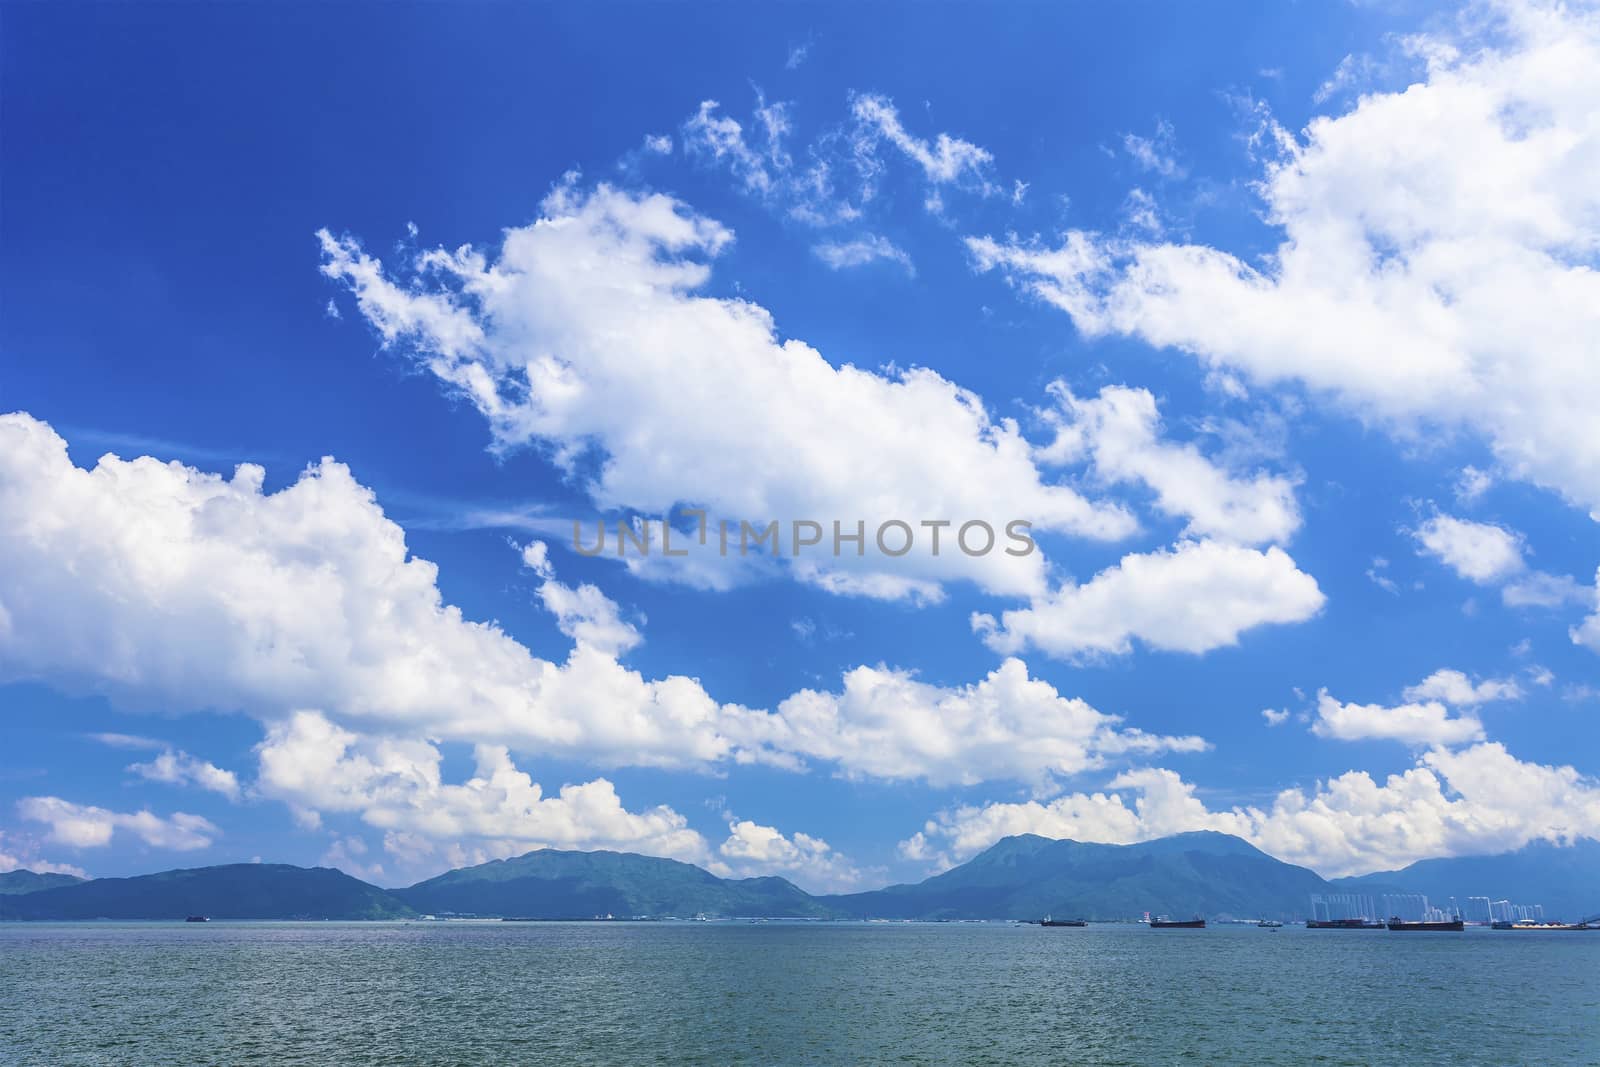 Sunny day landscape along the coast by kawing921